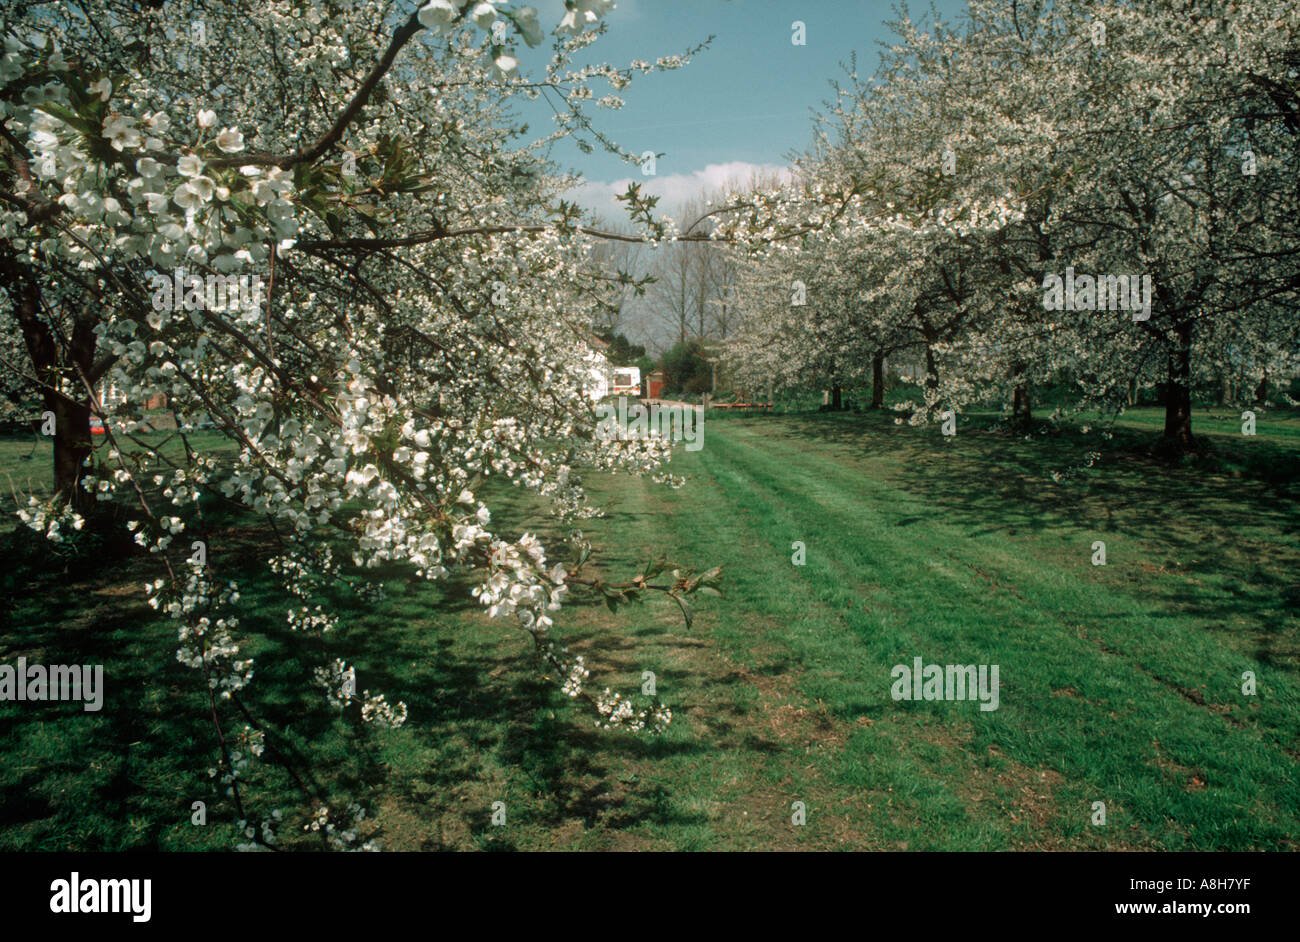 Well established orchard of large cherry trees in full blossom Stock Photo